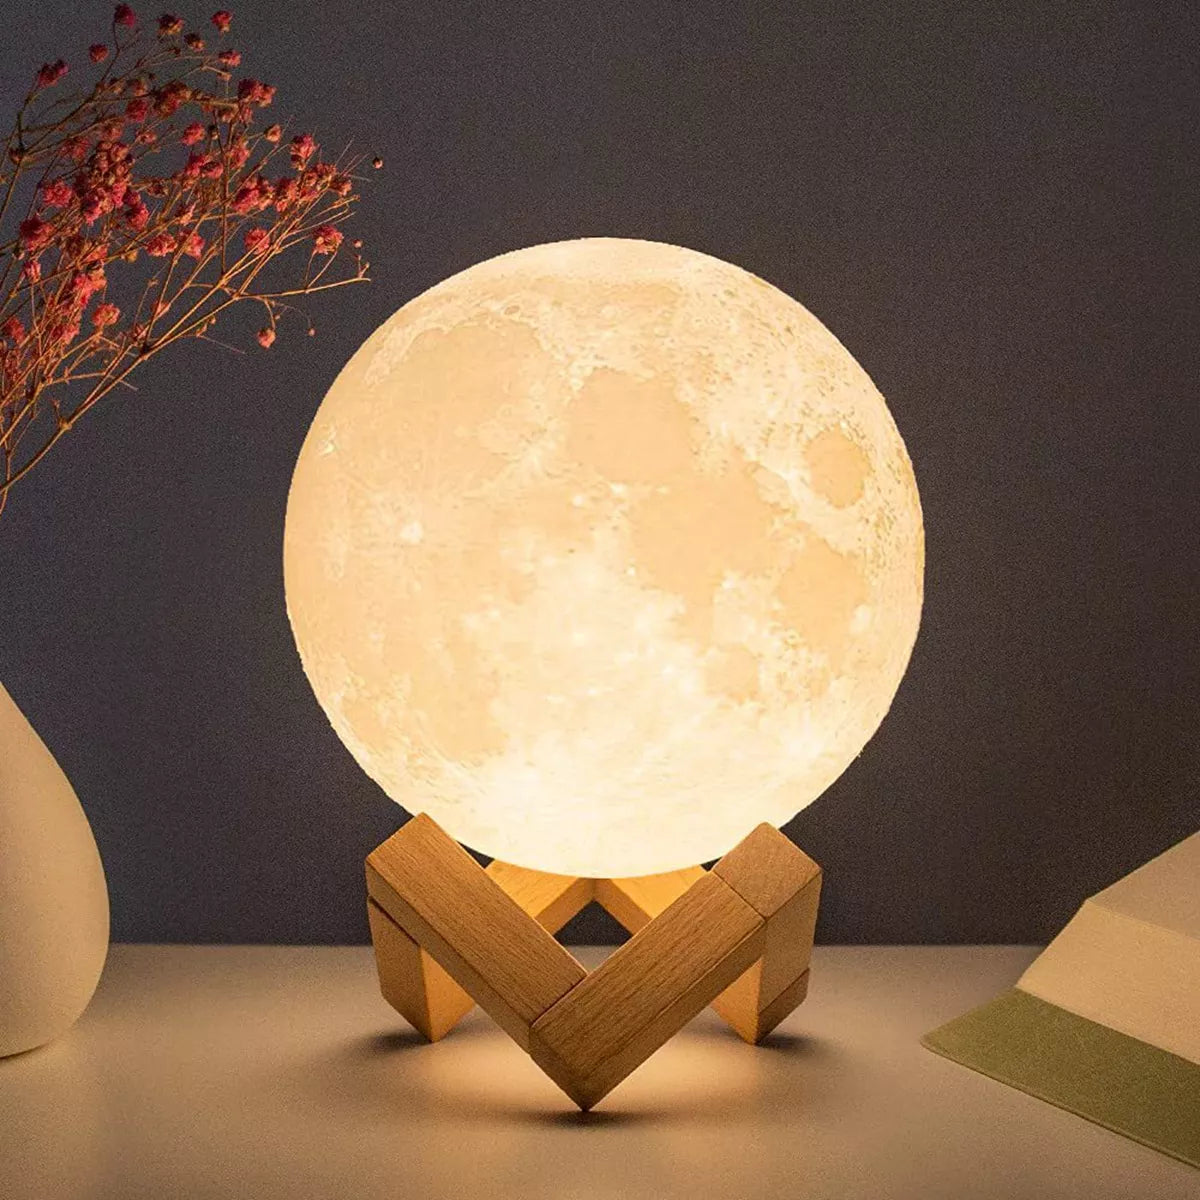 8cm Moon Lamp LED Night Light Battery Powered With Stand Starry Lamp Bedroom Decor Night Lights Kids Gift Moon Lamp  ourlum.com   